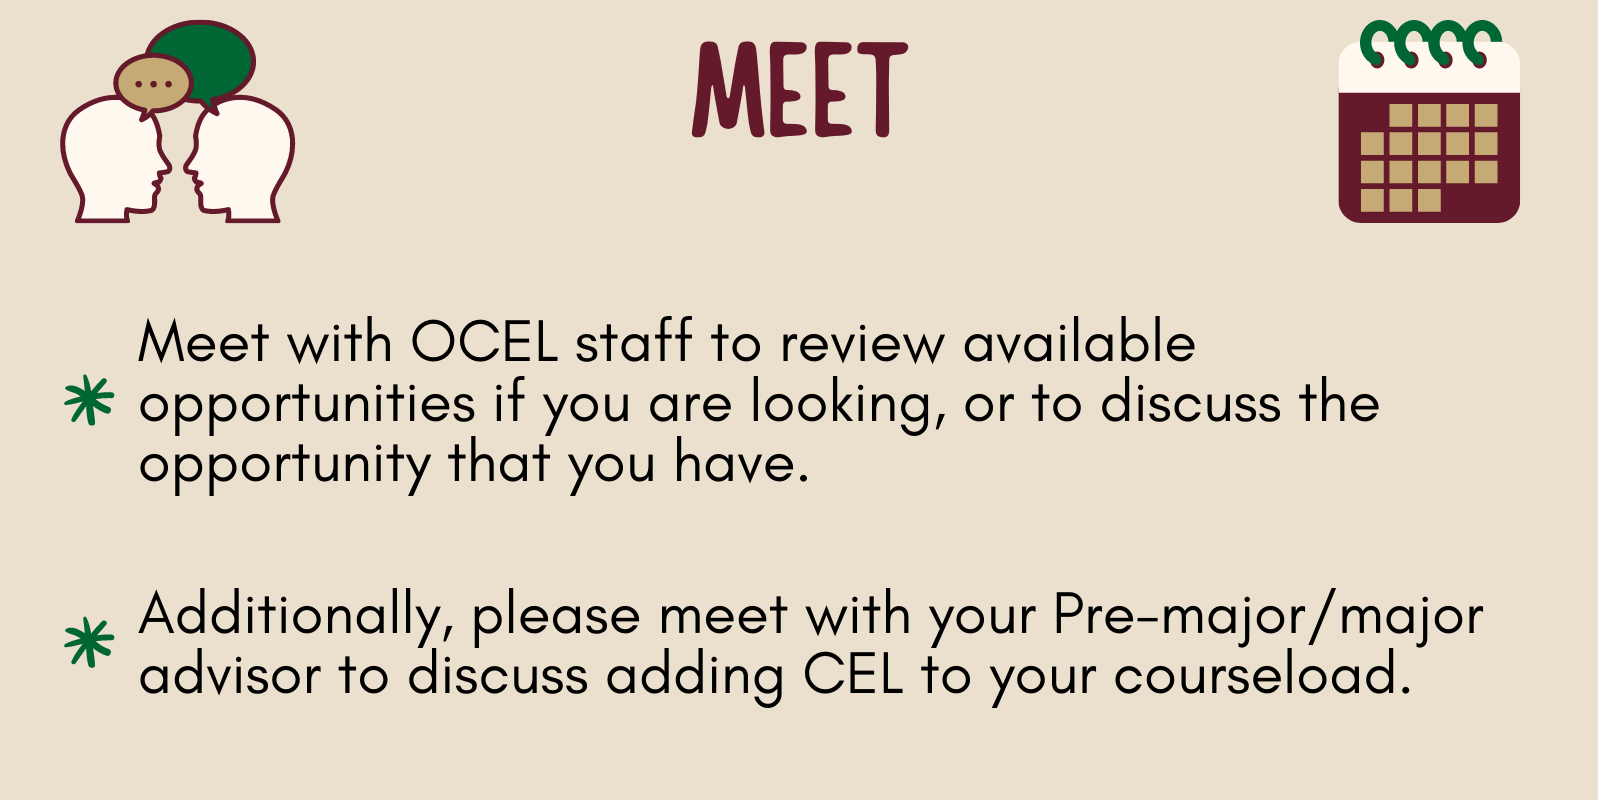 Meet with the OCEL staff and your advisor